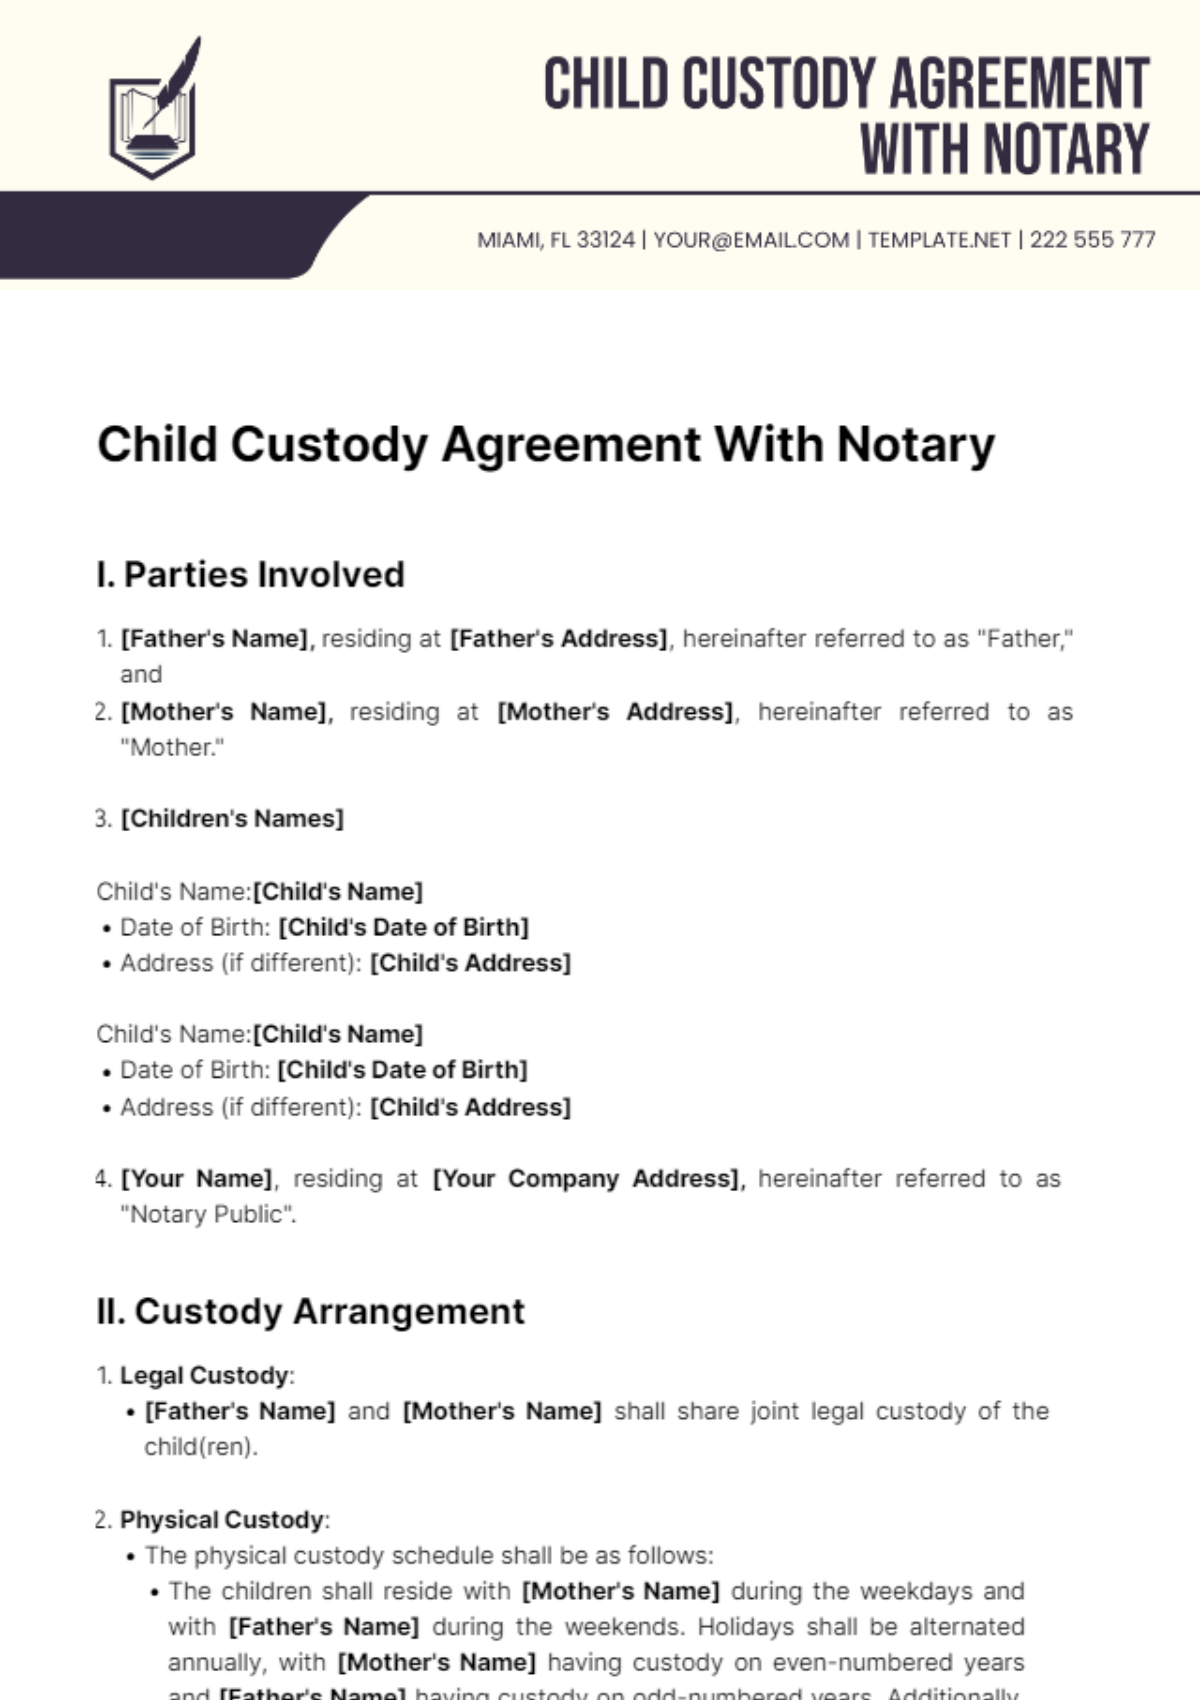 Free Child Custody Agreement With Notary Template